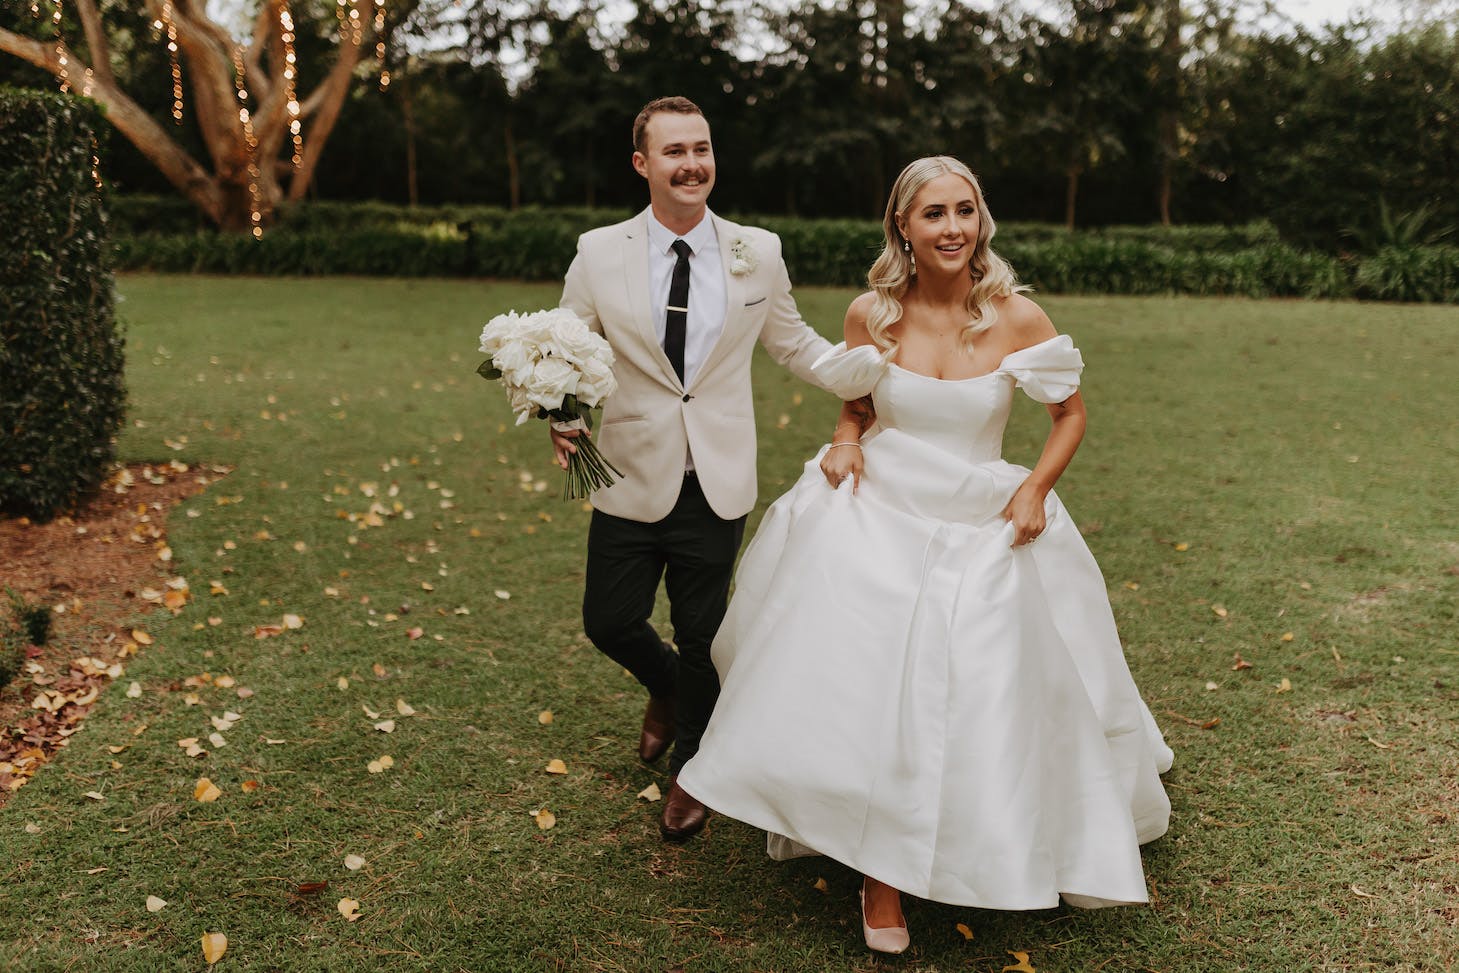 A smiling bride and groom walk hand in hand on a grassy lawn. The bride wears a white off-the-shoulder gown and holds her dress up in one hand while holding a bouquet of white flowers in the other. The groom dons a light-colored blazer, dark pants, and a black tie.